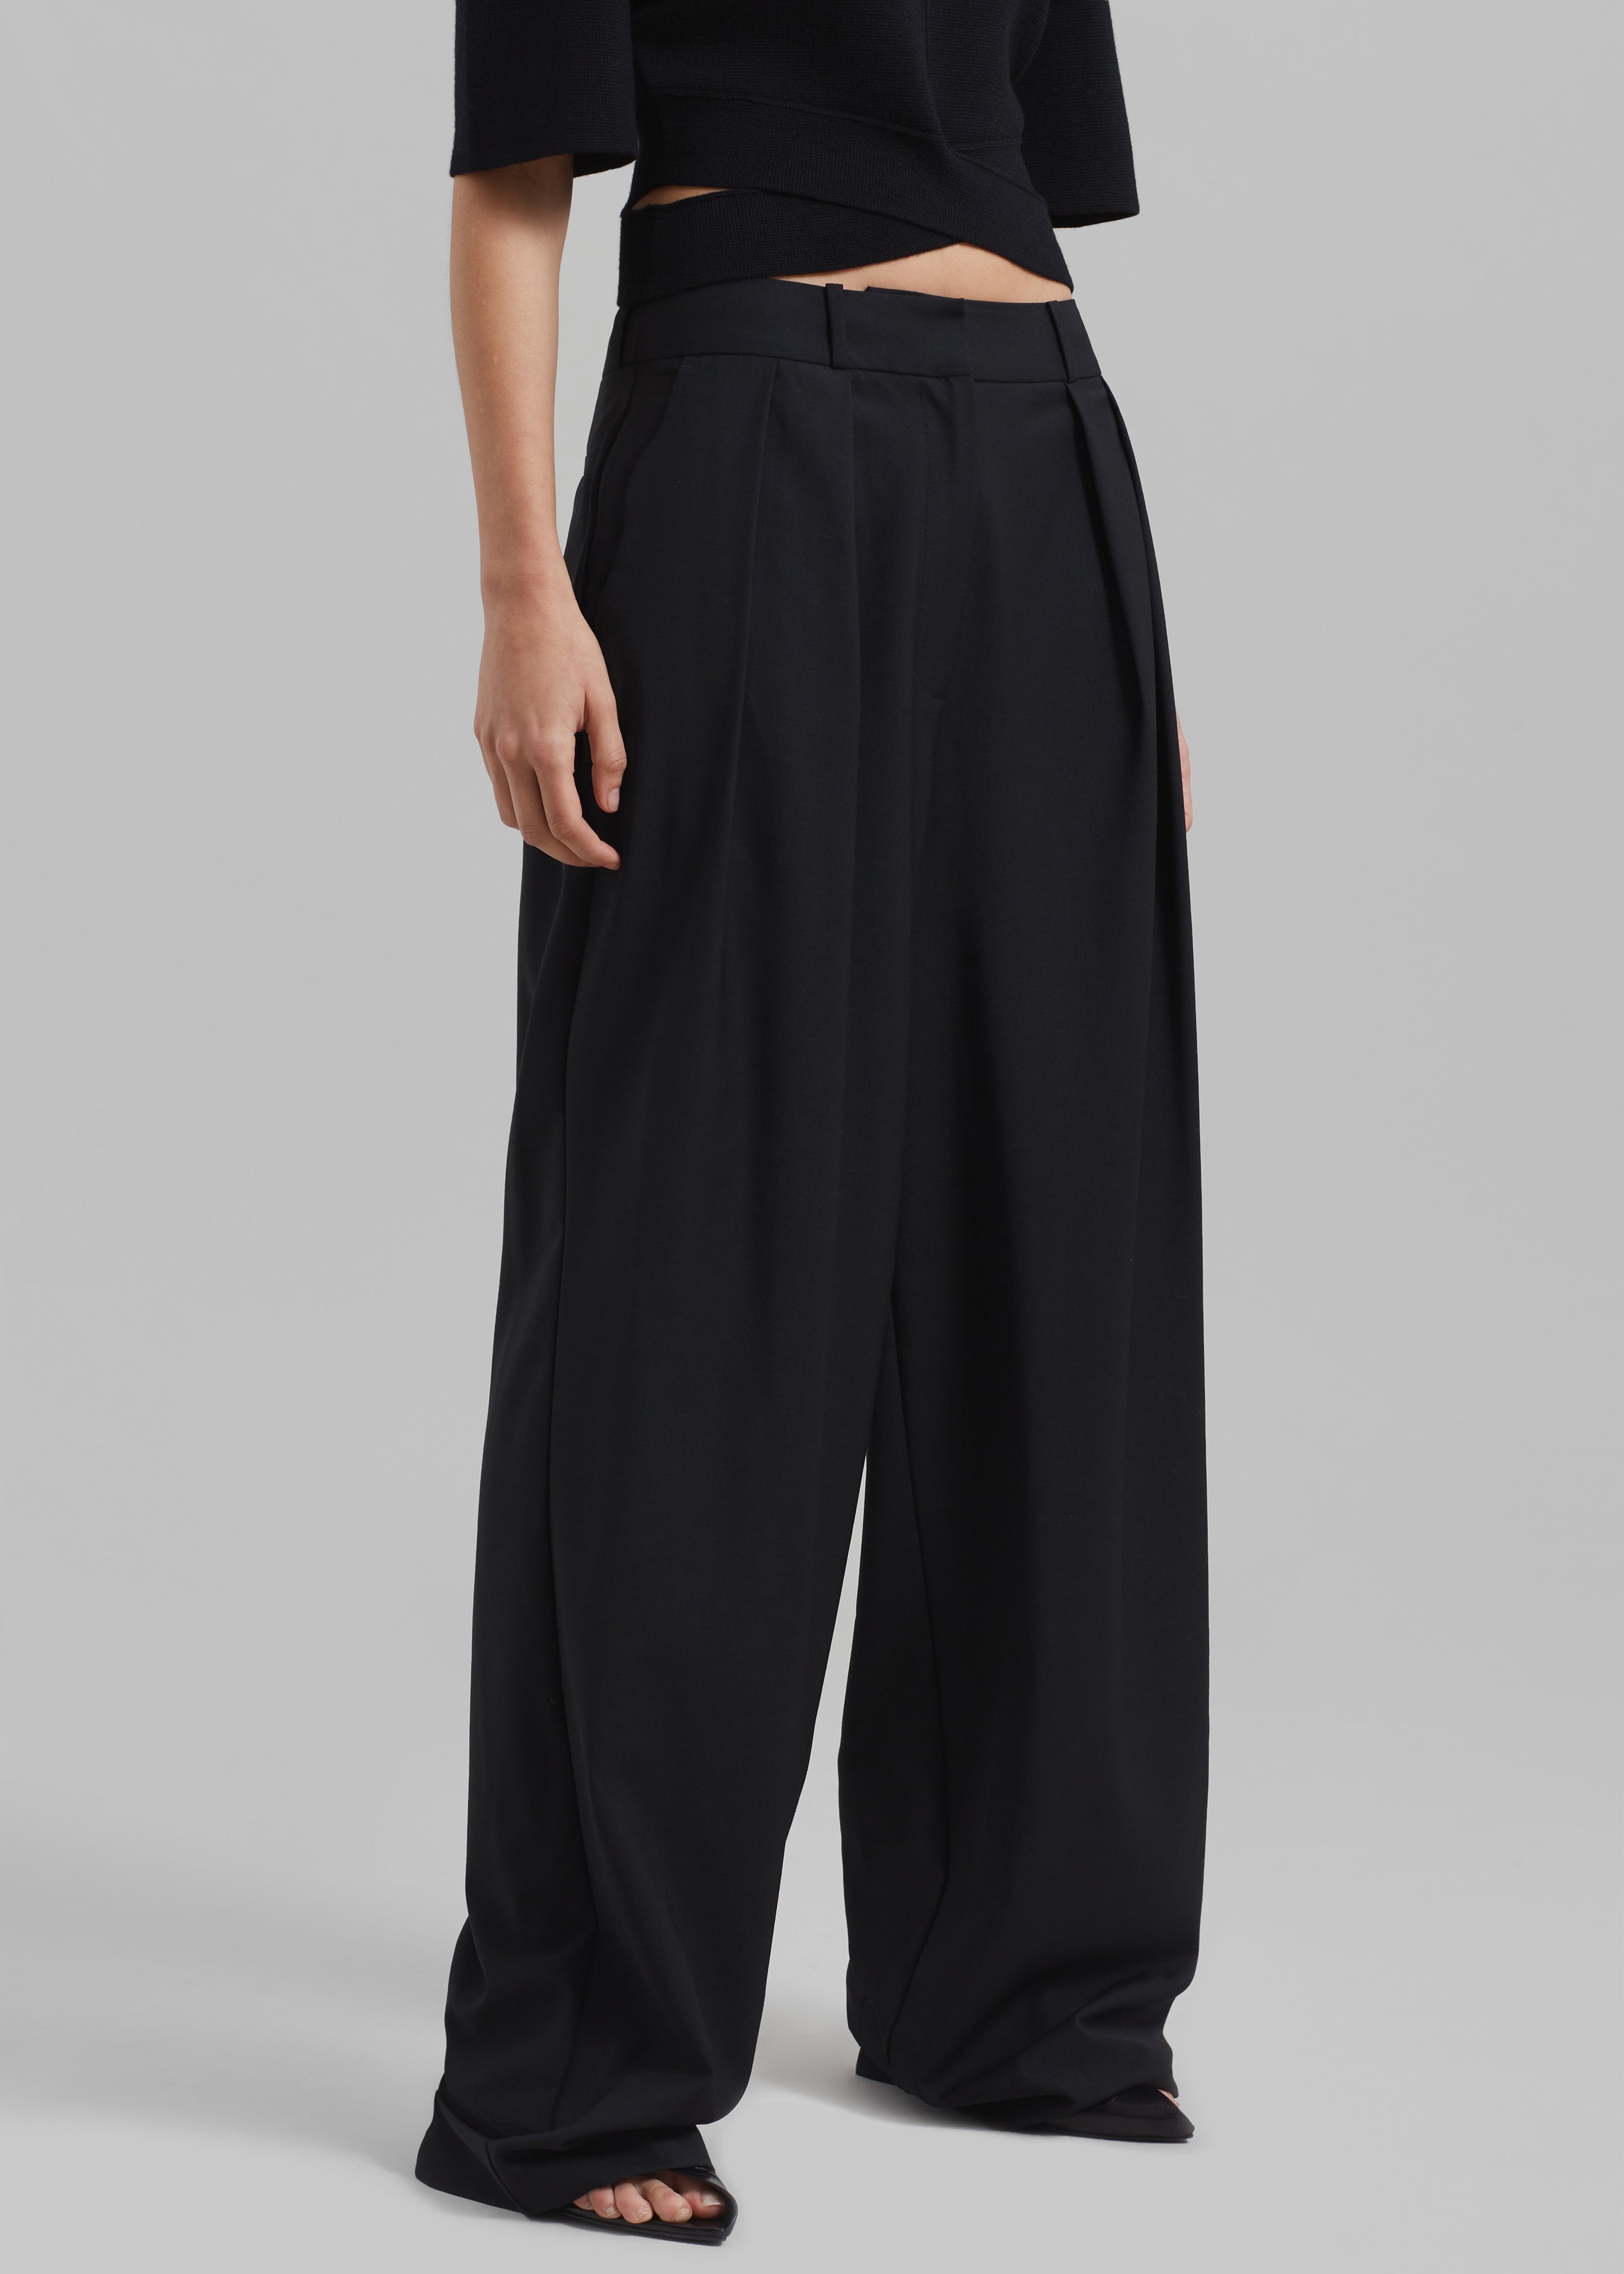 Ripley Pleated Trousers - Black - 5